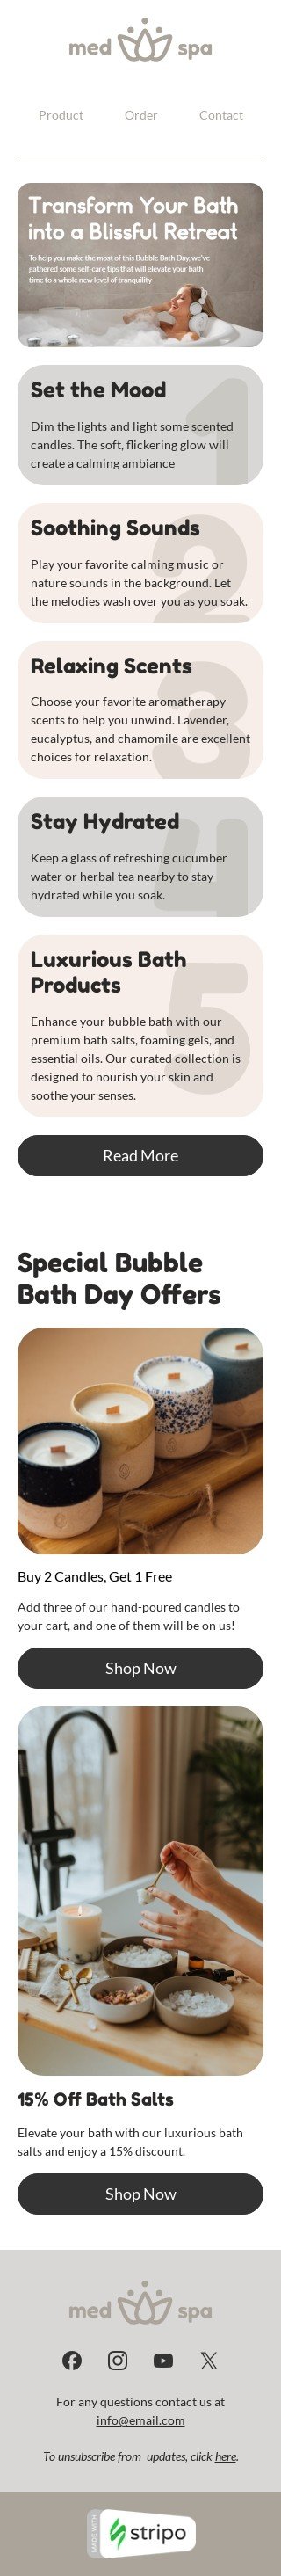 Bubble Bath Day email template "Transform your bath" for health and wellness industry mobile view